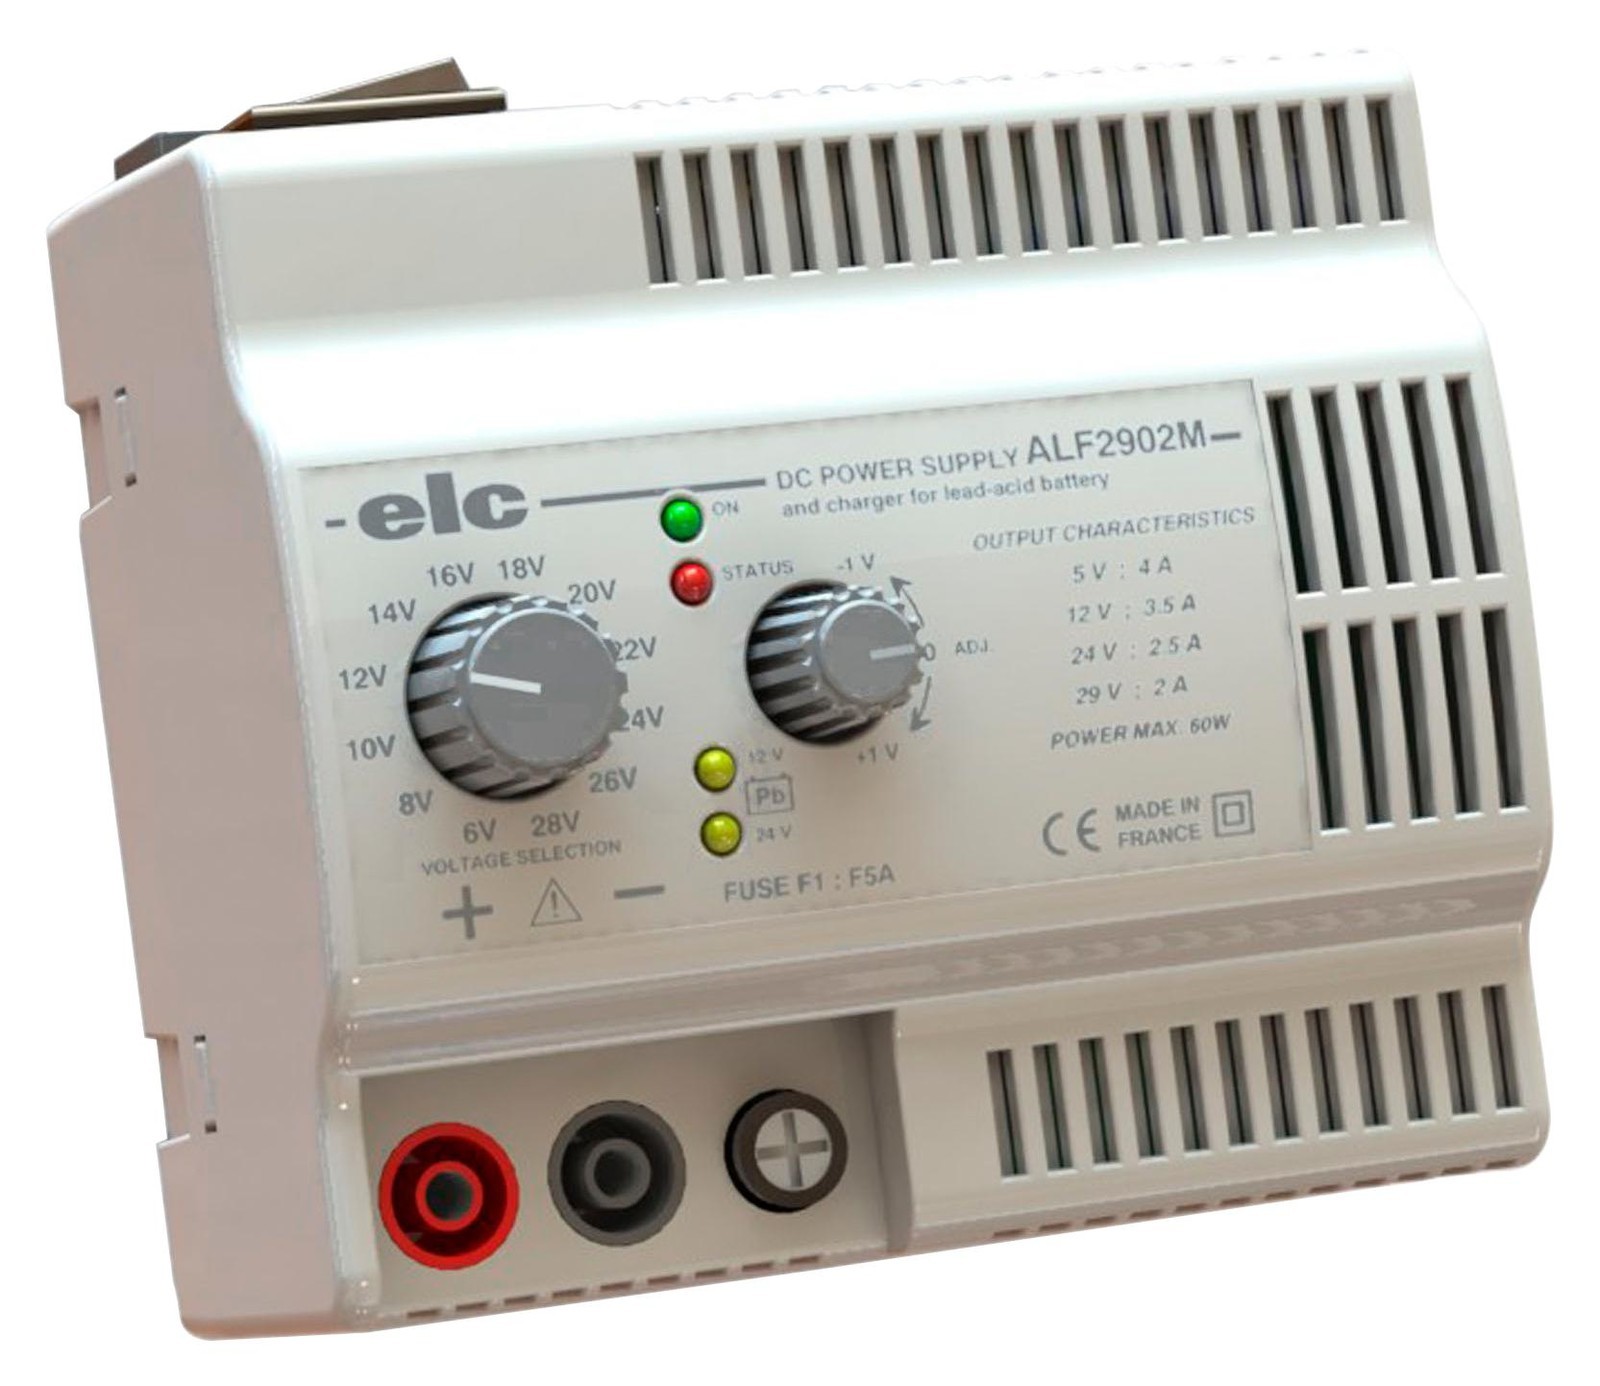 Elc Alf2902M Power Supply, Battery Charger, 60W